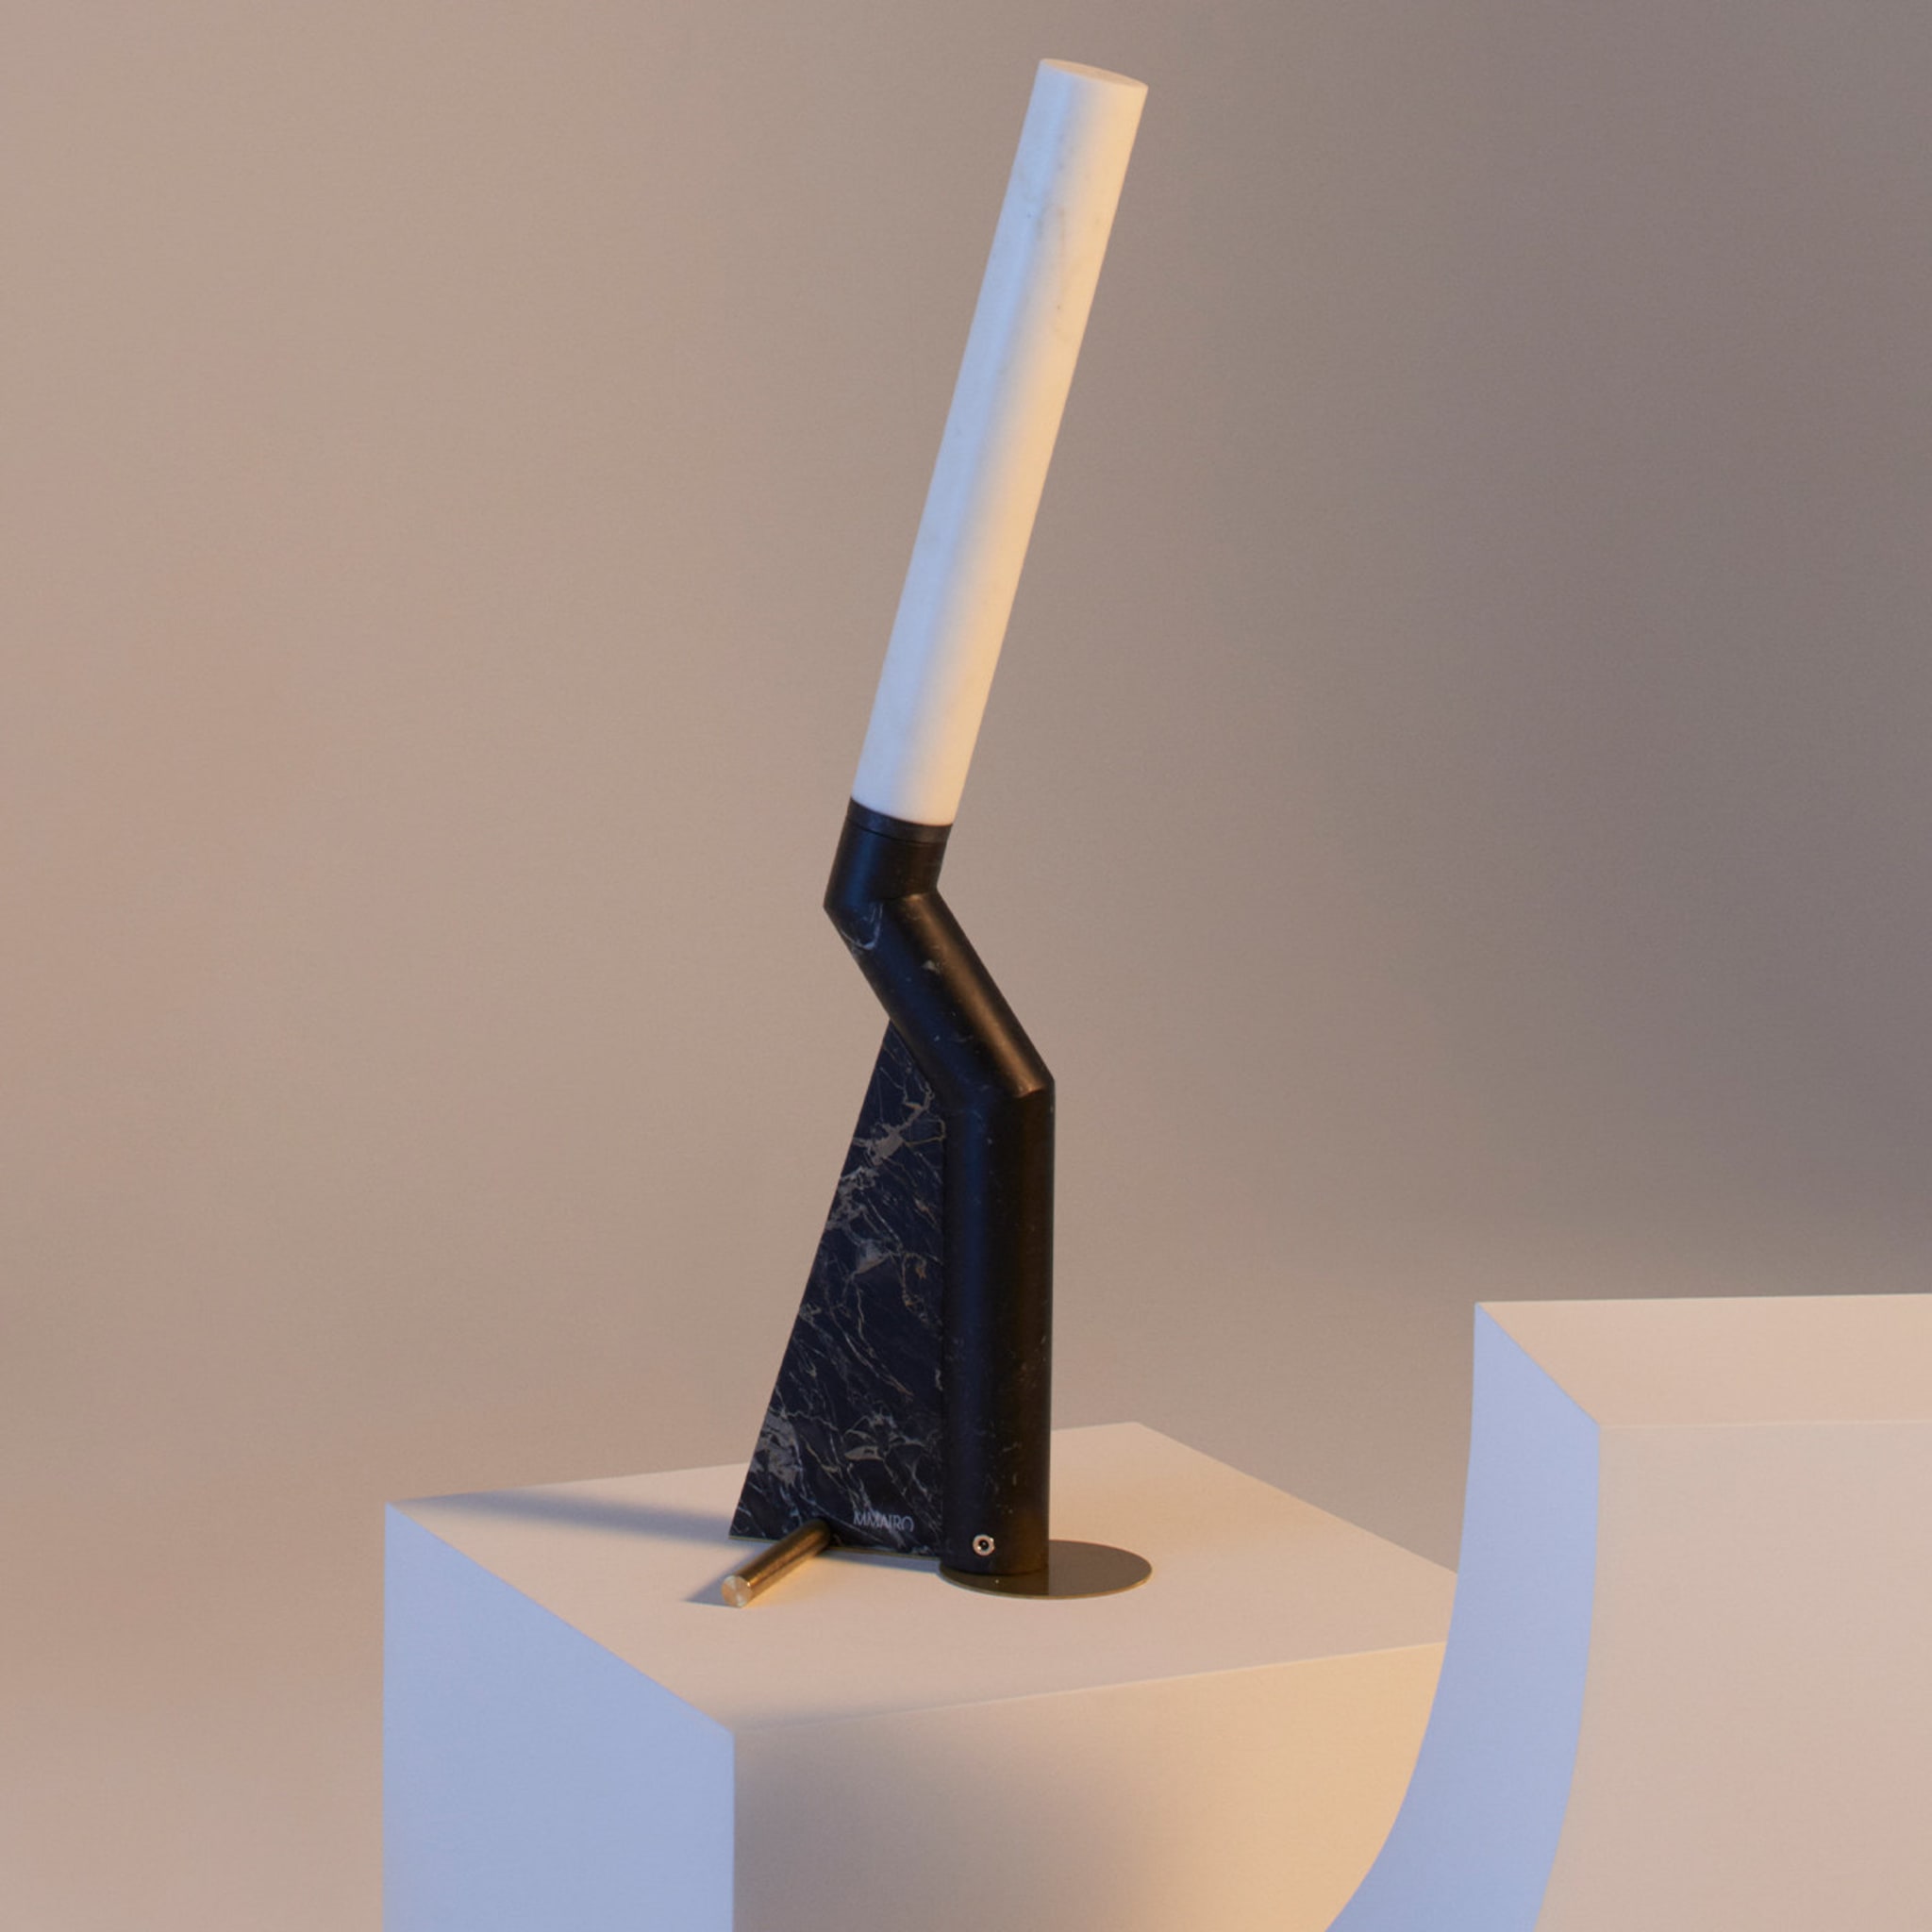 Heron Black Table Lamp by Bec Brittain - Alternative view 1